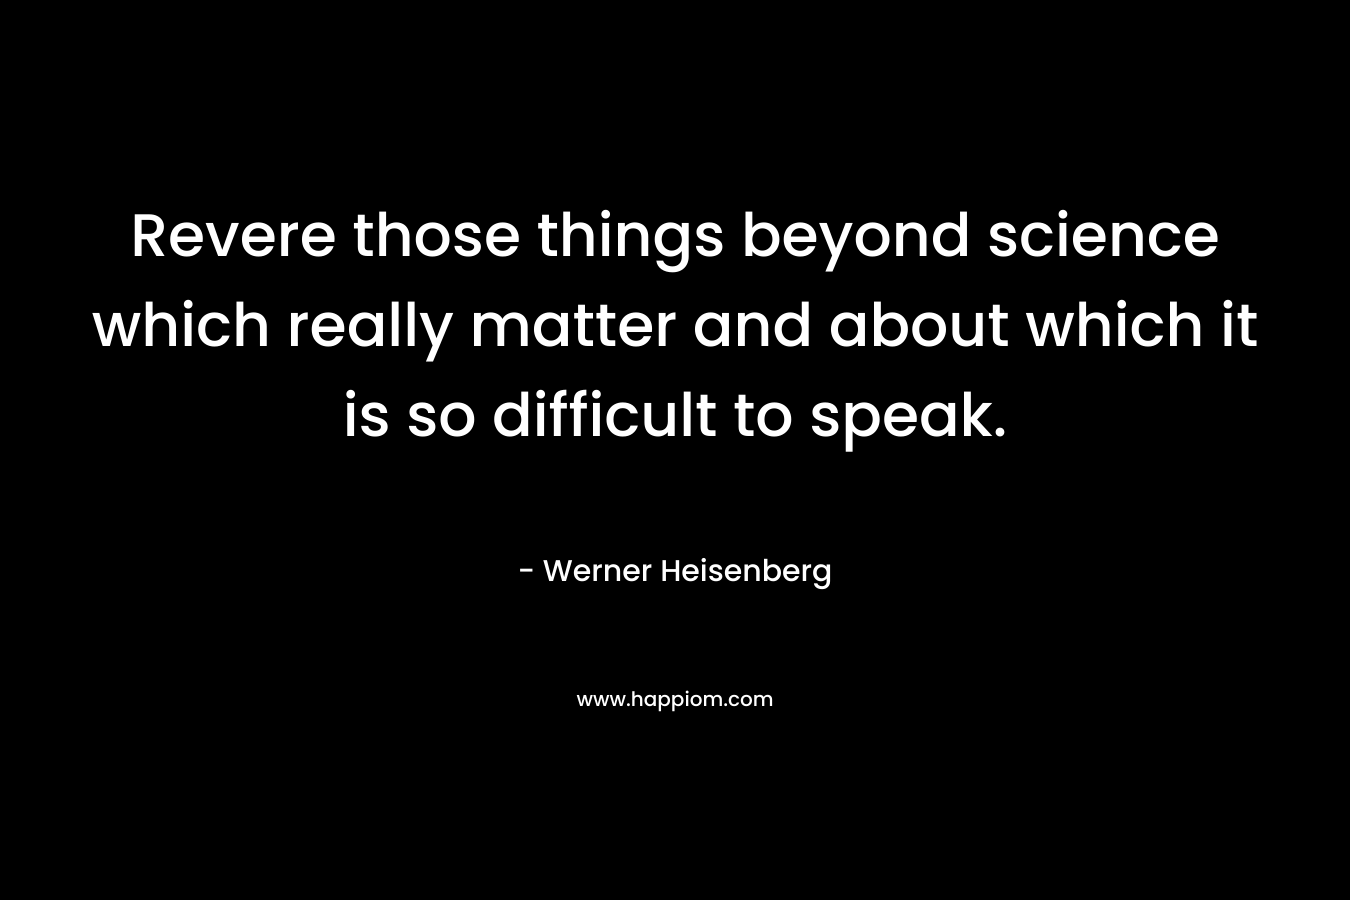 Revere those things beyond science which really matter and about which it is so difficult to speak. – Werner Heisenberg